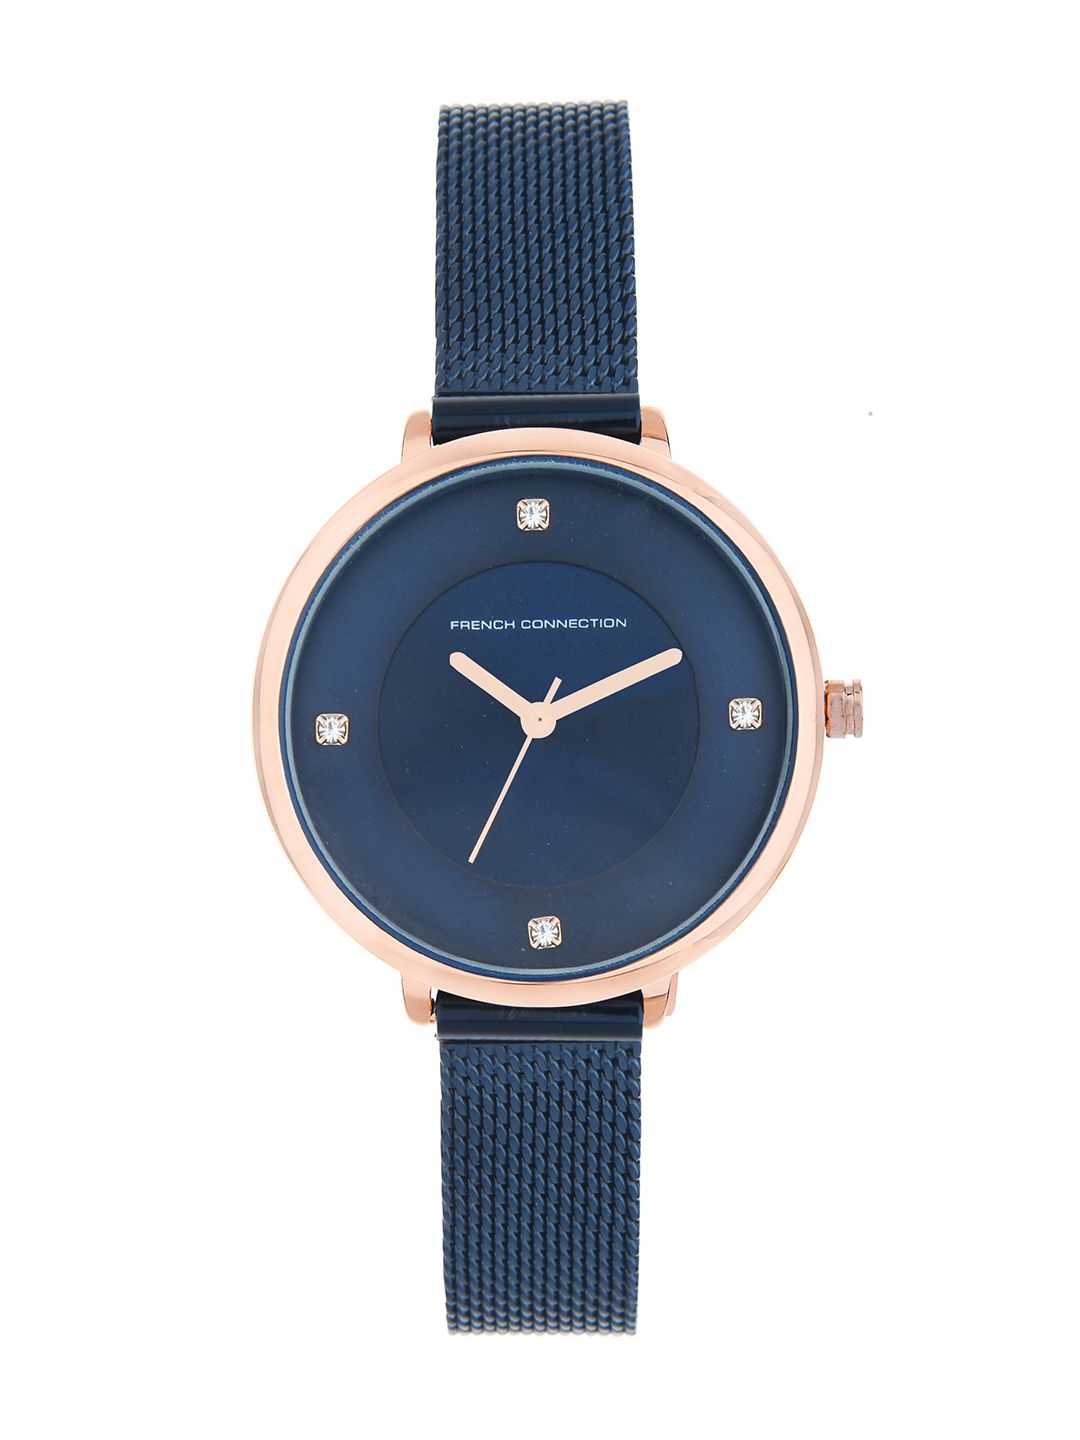 French Connection Women Navy Blue Analogue Watch FCN0007A Price in India